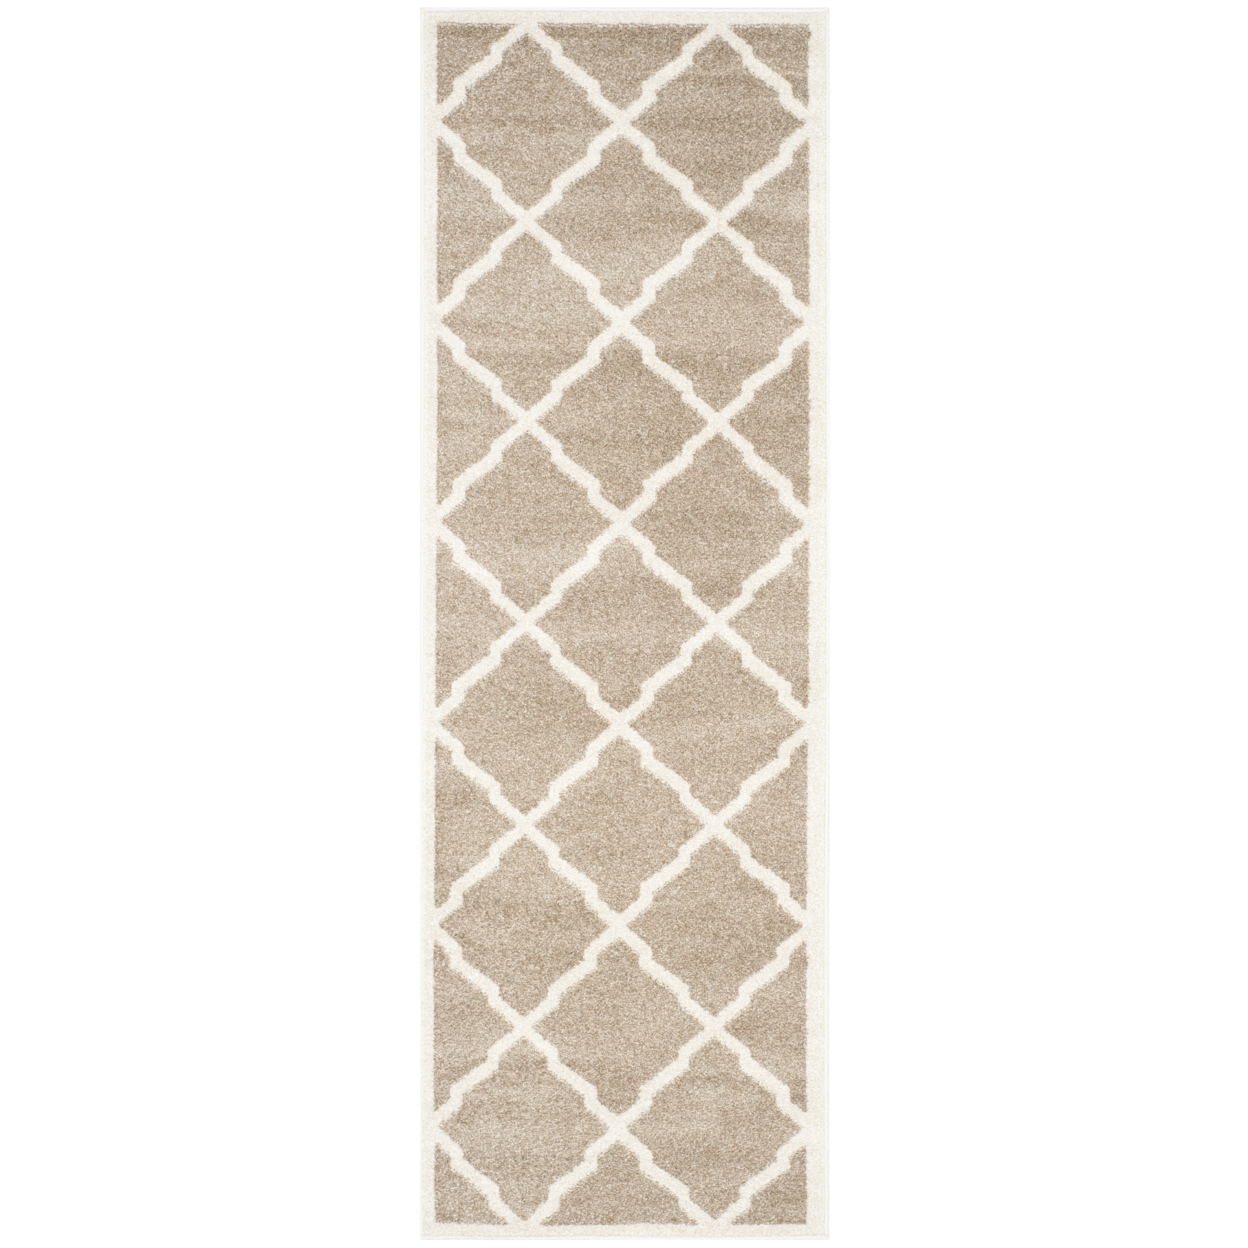 SAFAVIEH Amherst Collection AMT421S Wheat / Beige Rug - 5' Square